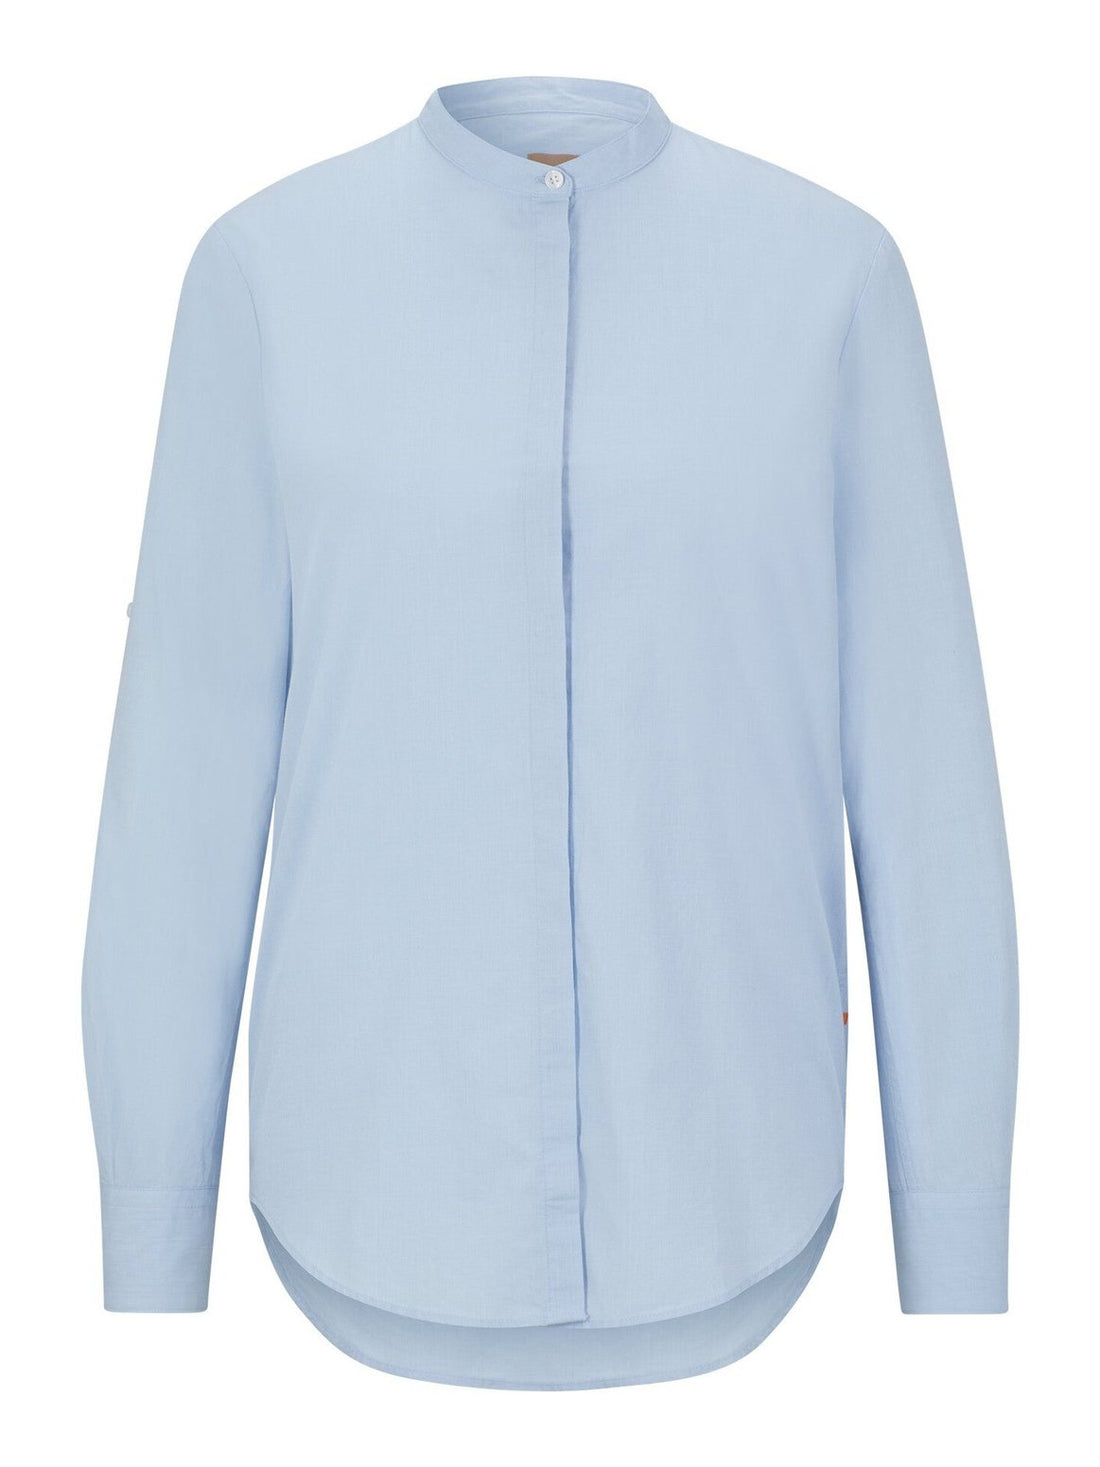 Befelize - Casual Blouses in Light Pastel Blue